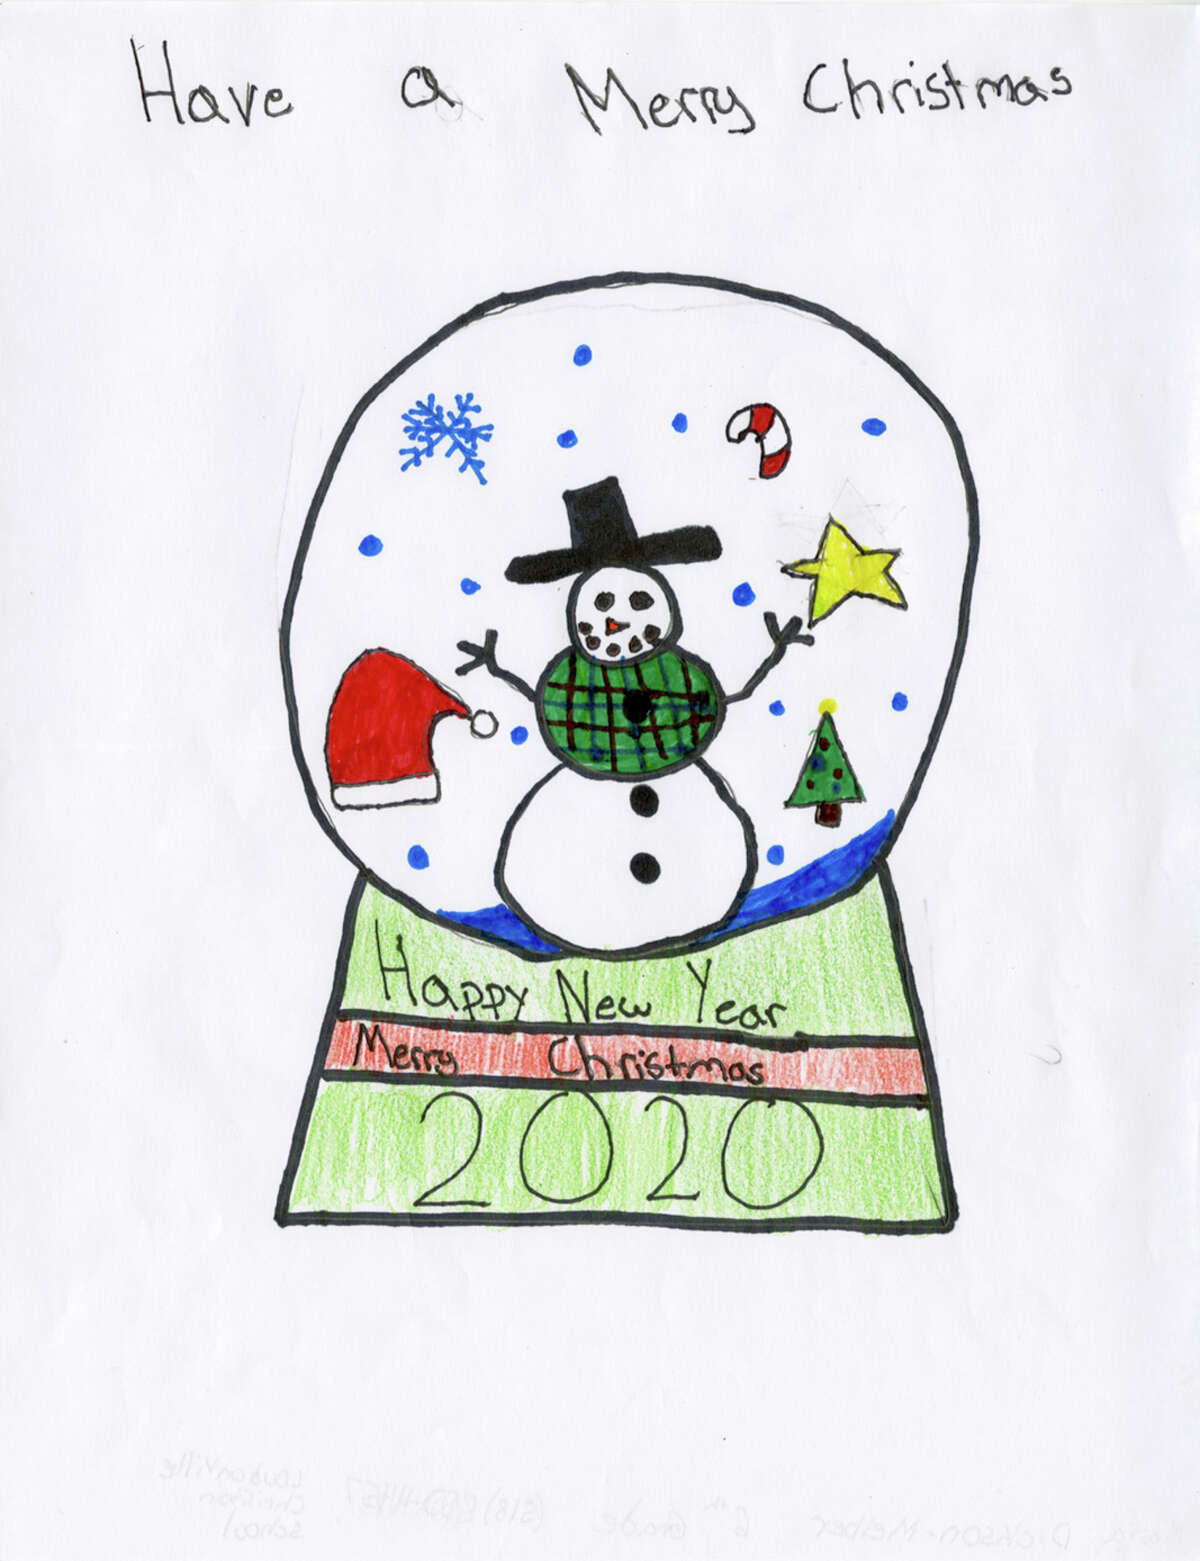 An entry from a schoolchild in the Capital Region for the 2020 Holiday Card Contest.